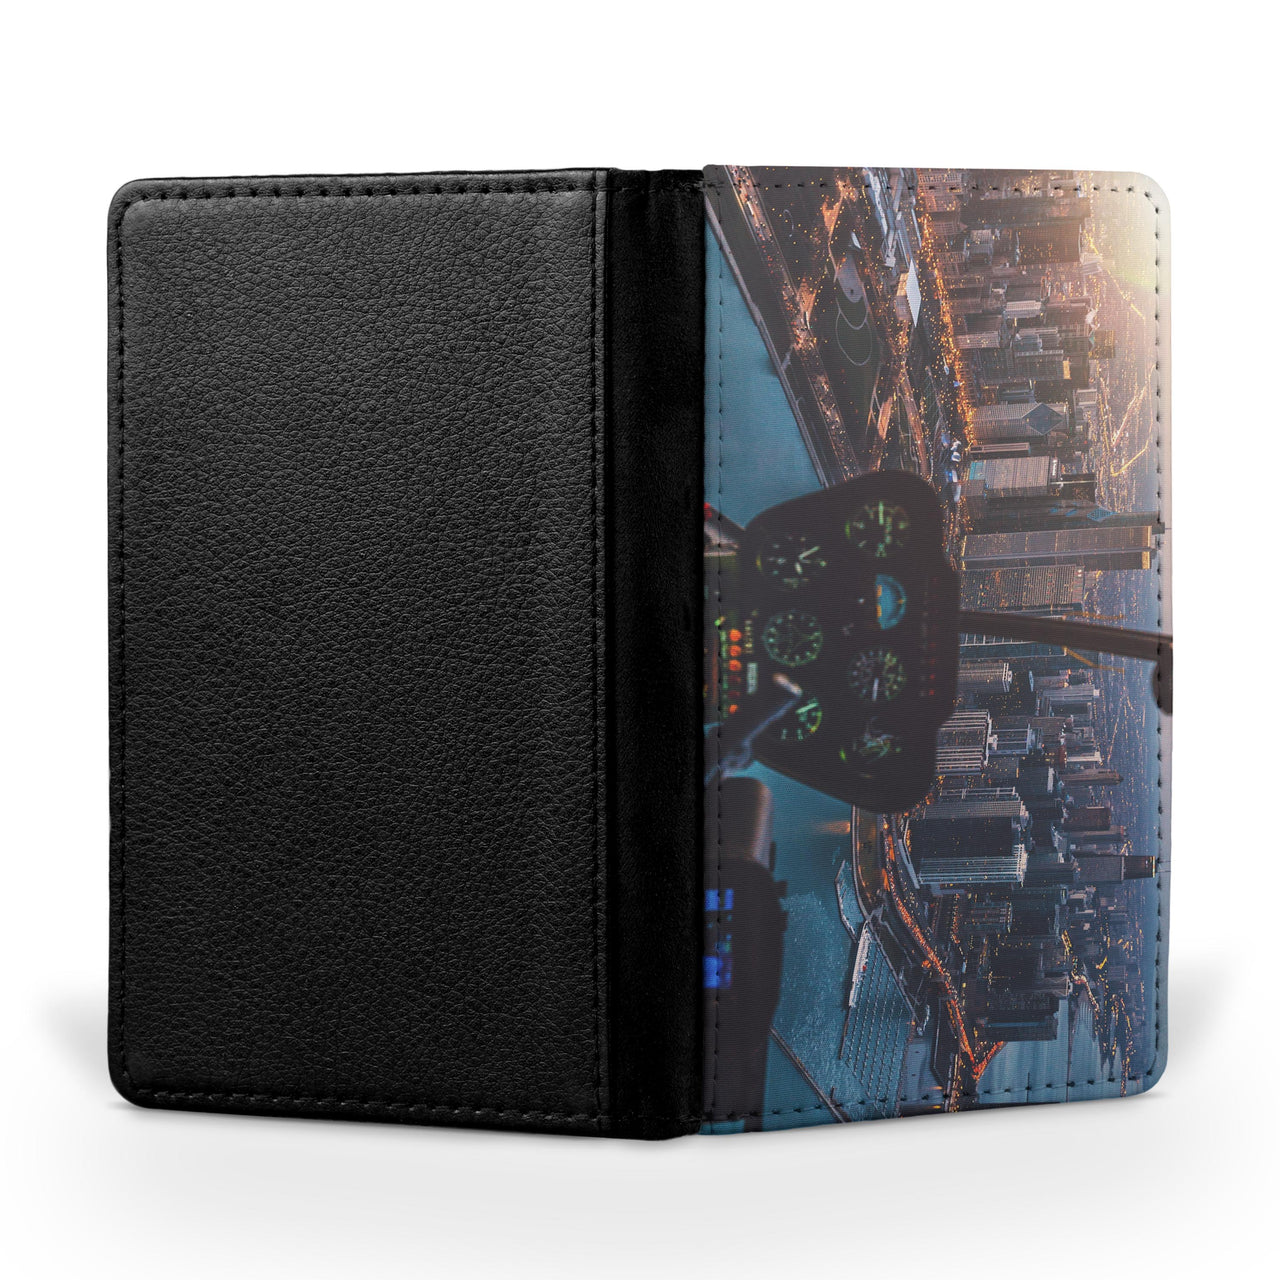 Amazing City View from Helicopter Cockpit Printed Passport & Travel Cases